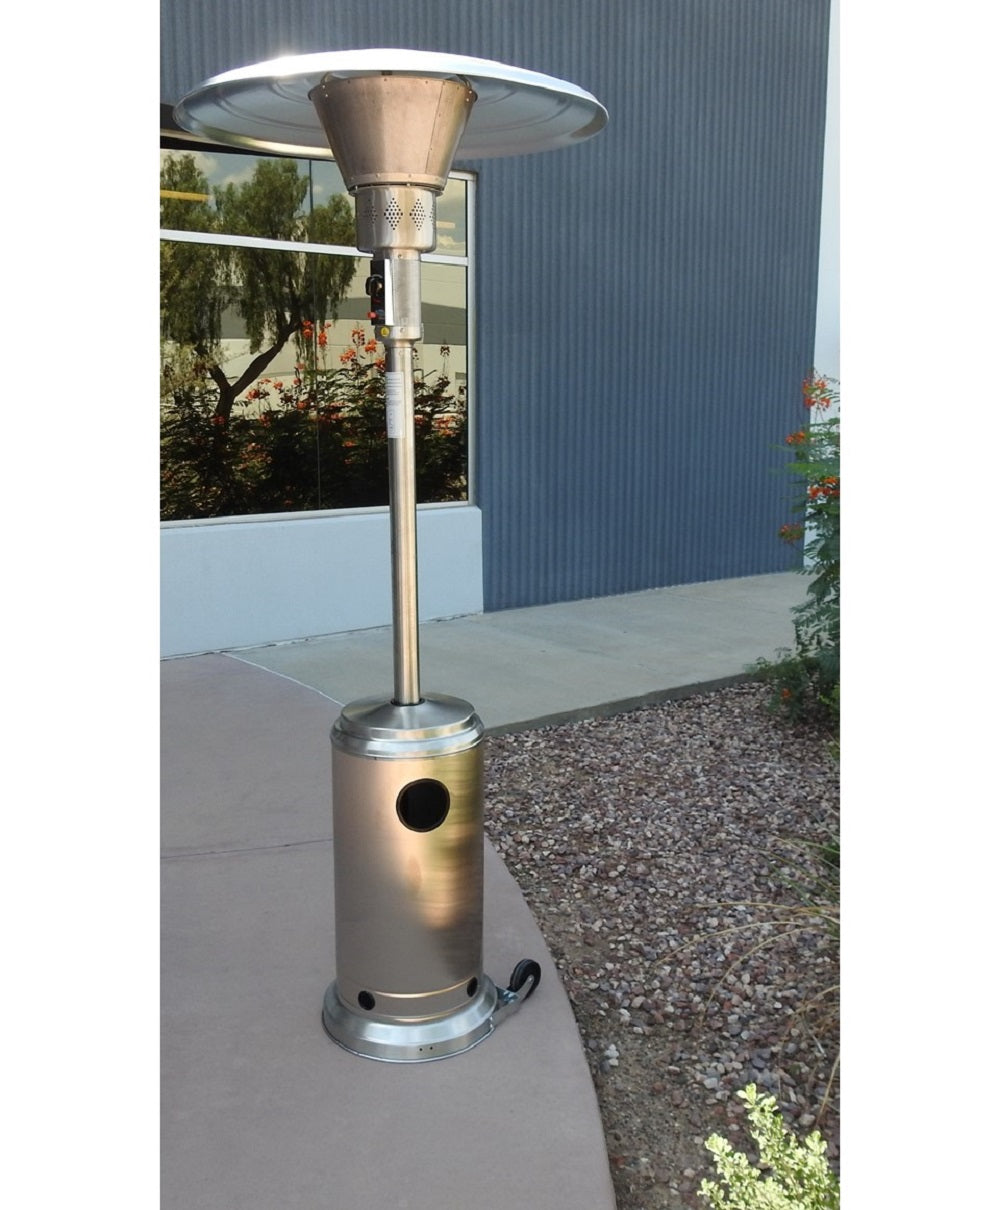 Hiland 90" Tall Commercial Patio Heater -Stainless Steel- BURN-2650-SS - Lifestyle Outdoor